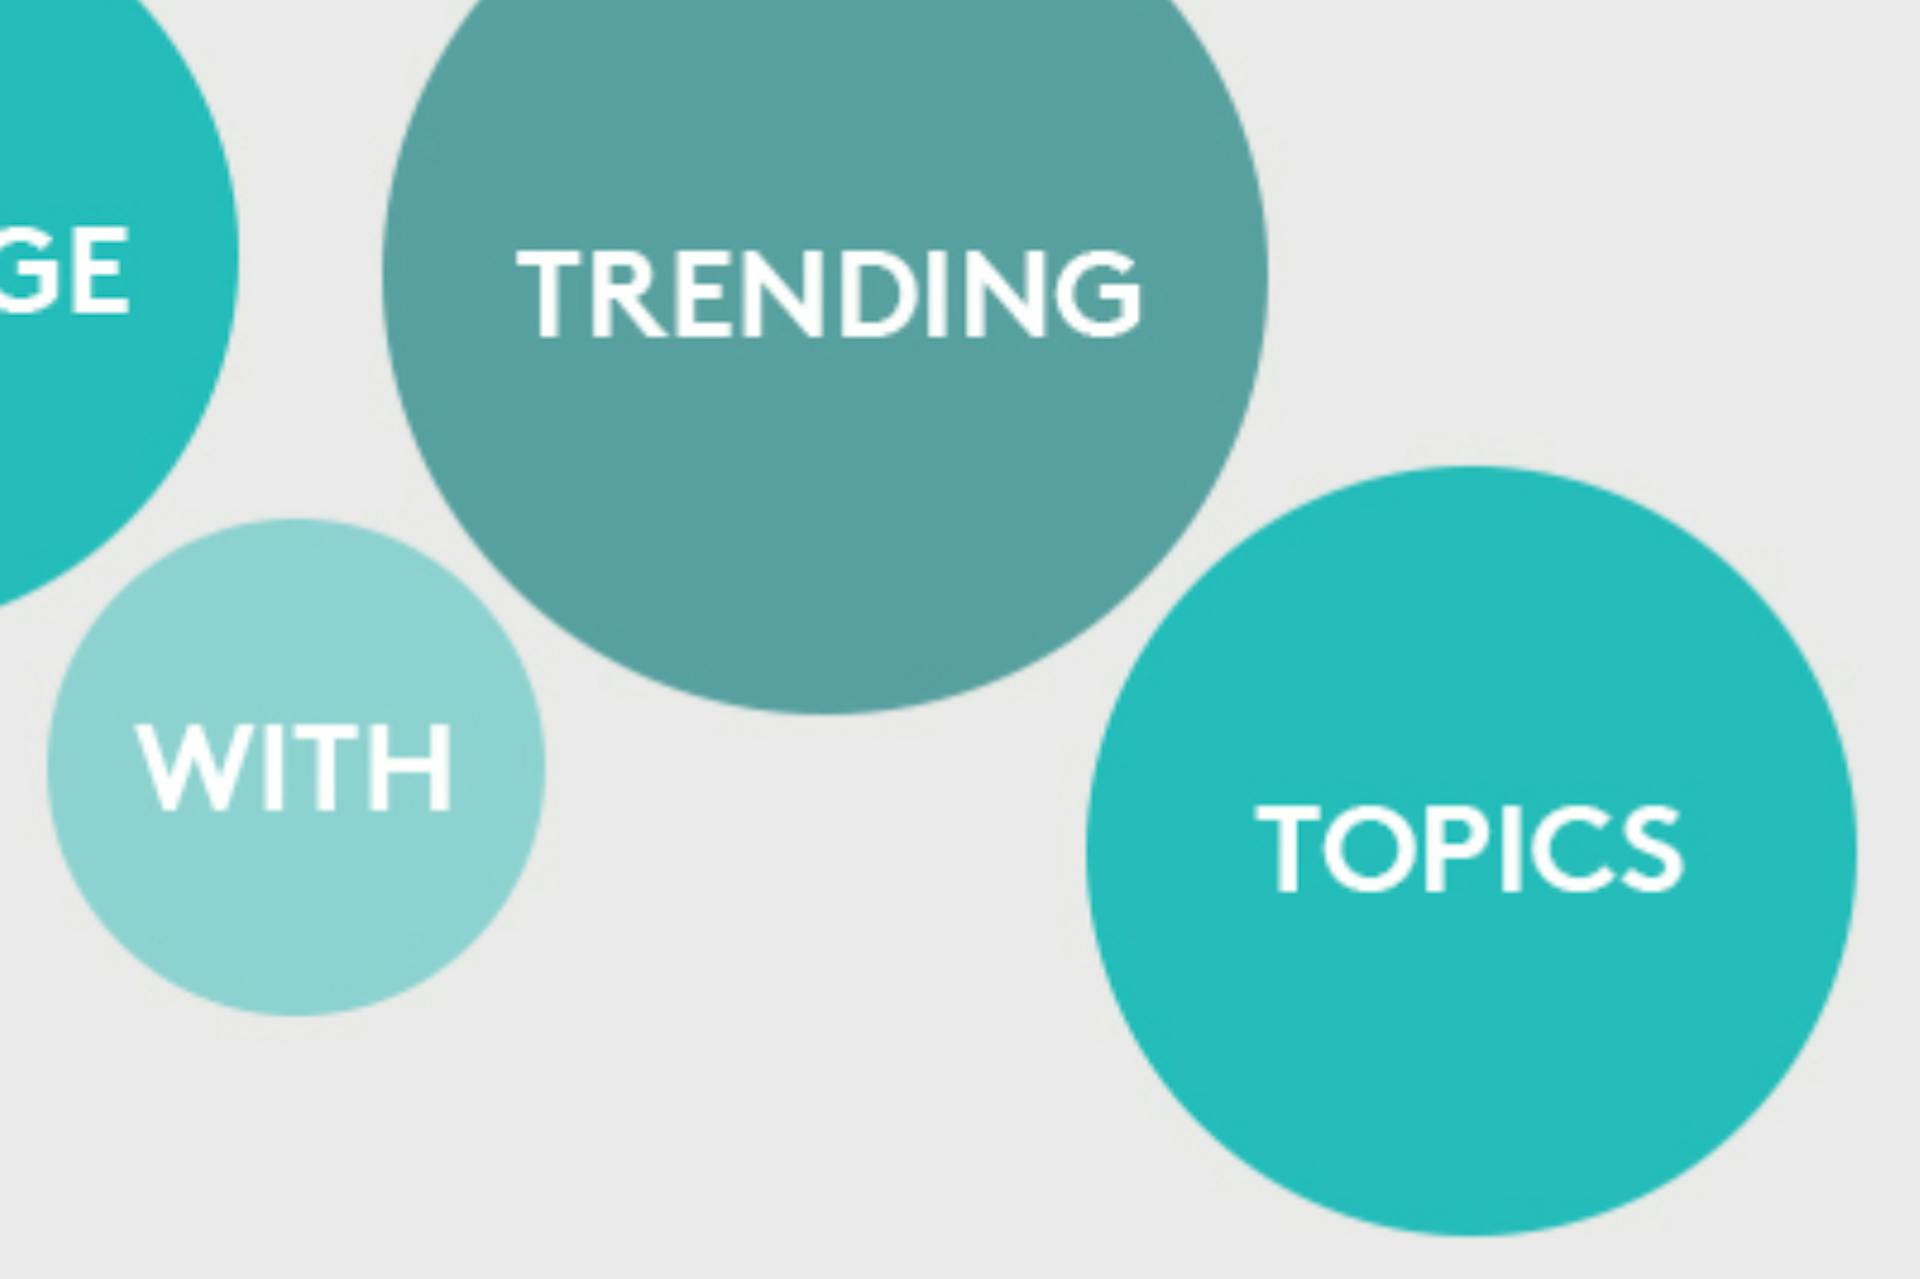 Three blue circles with one word in each - with, trending and topics".